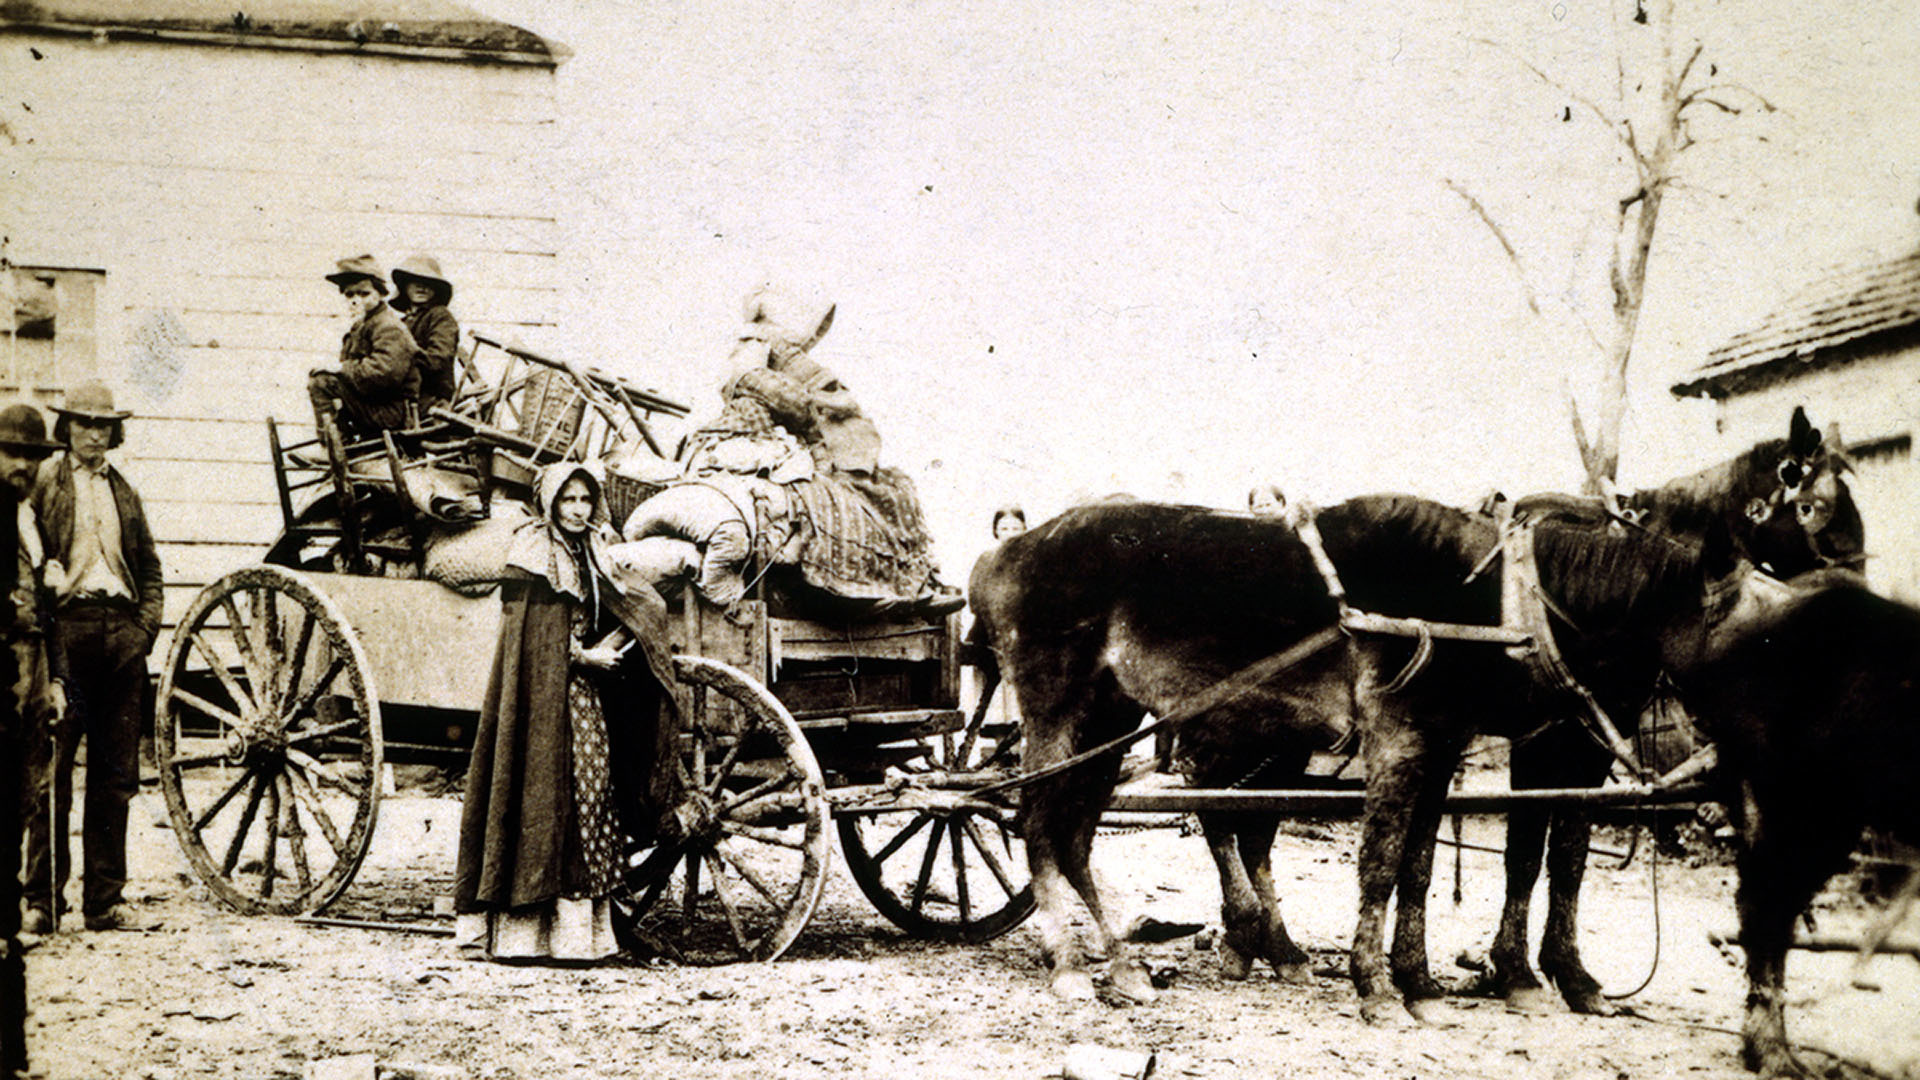 A sepia-toned photo showing a southern refugee family loading a horse-drawn wagon with their furniture and belongings.